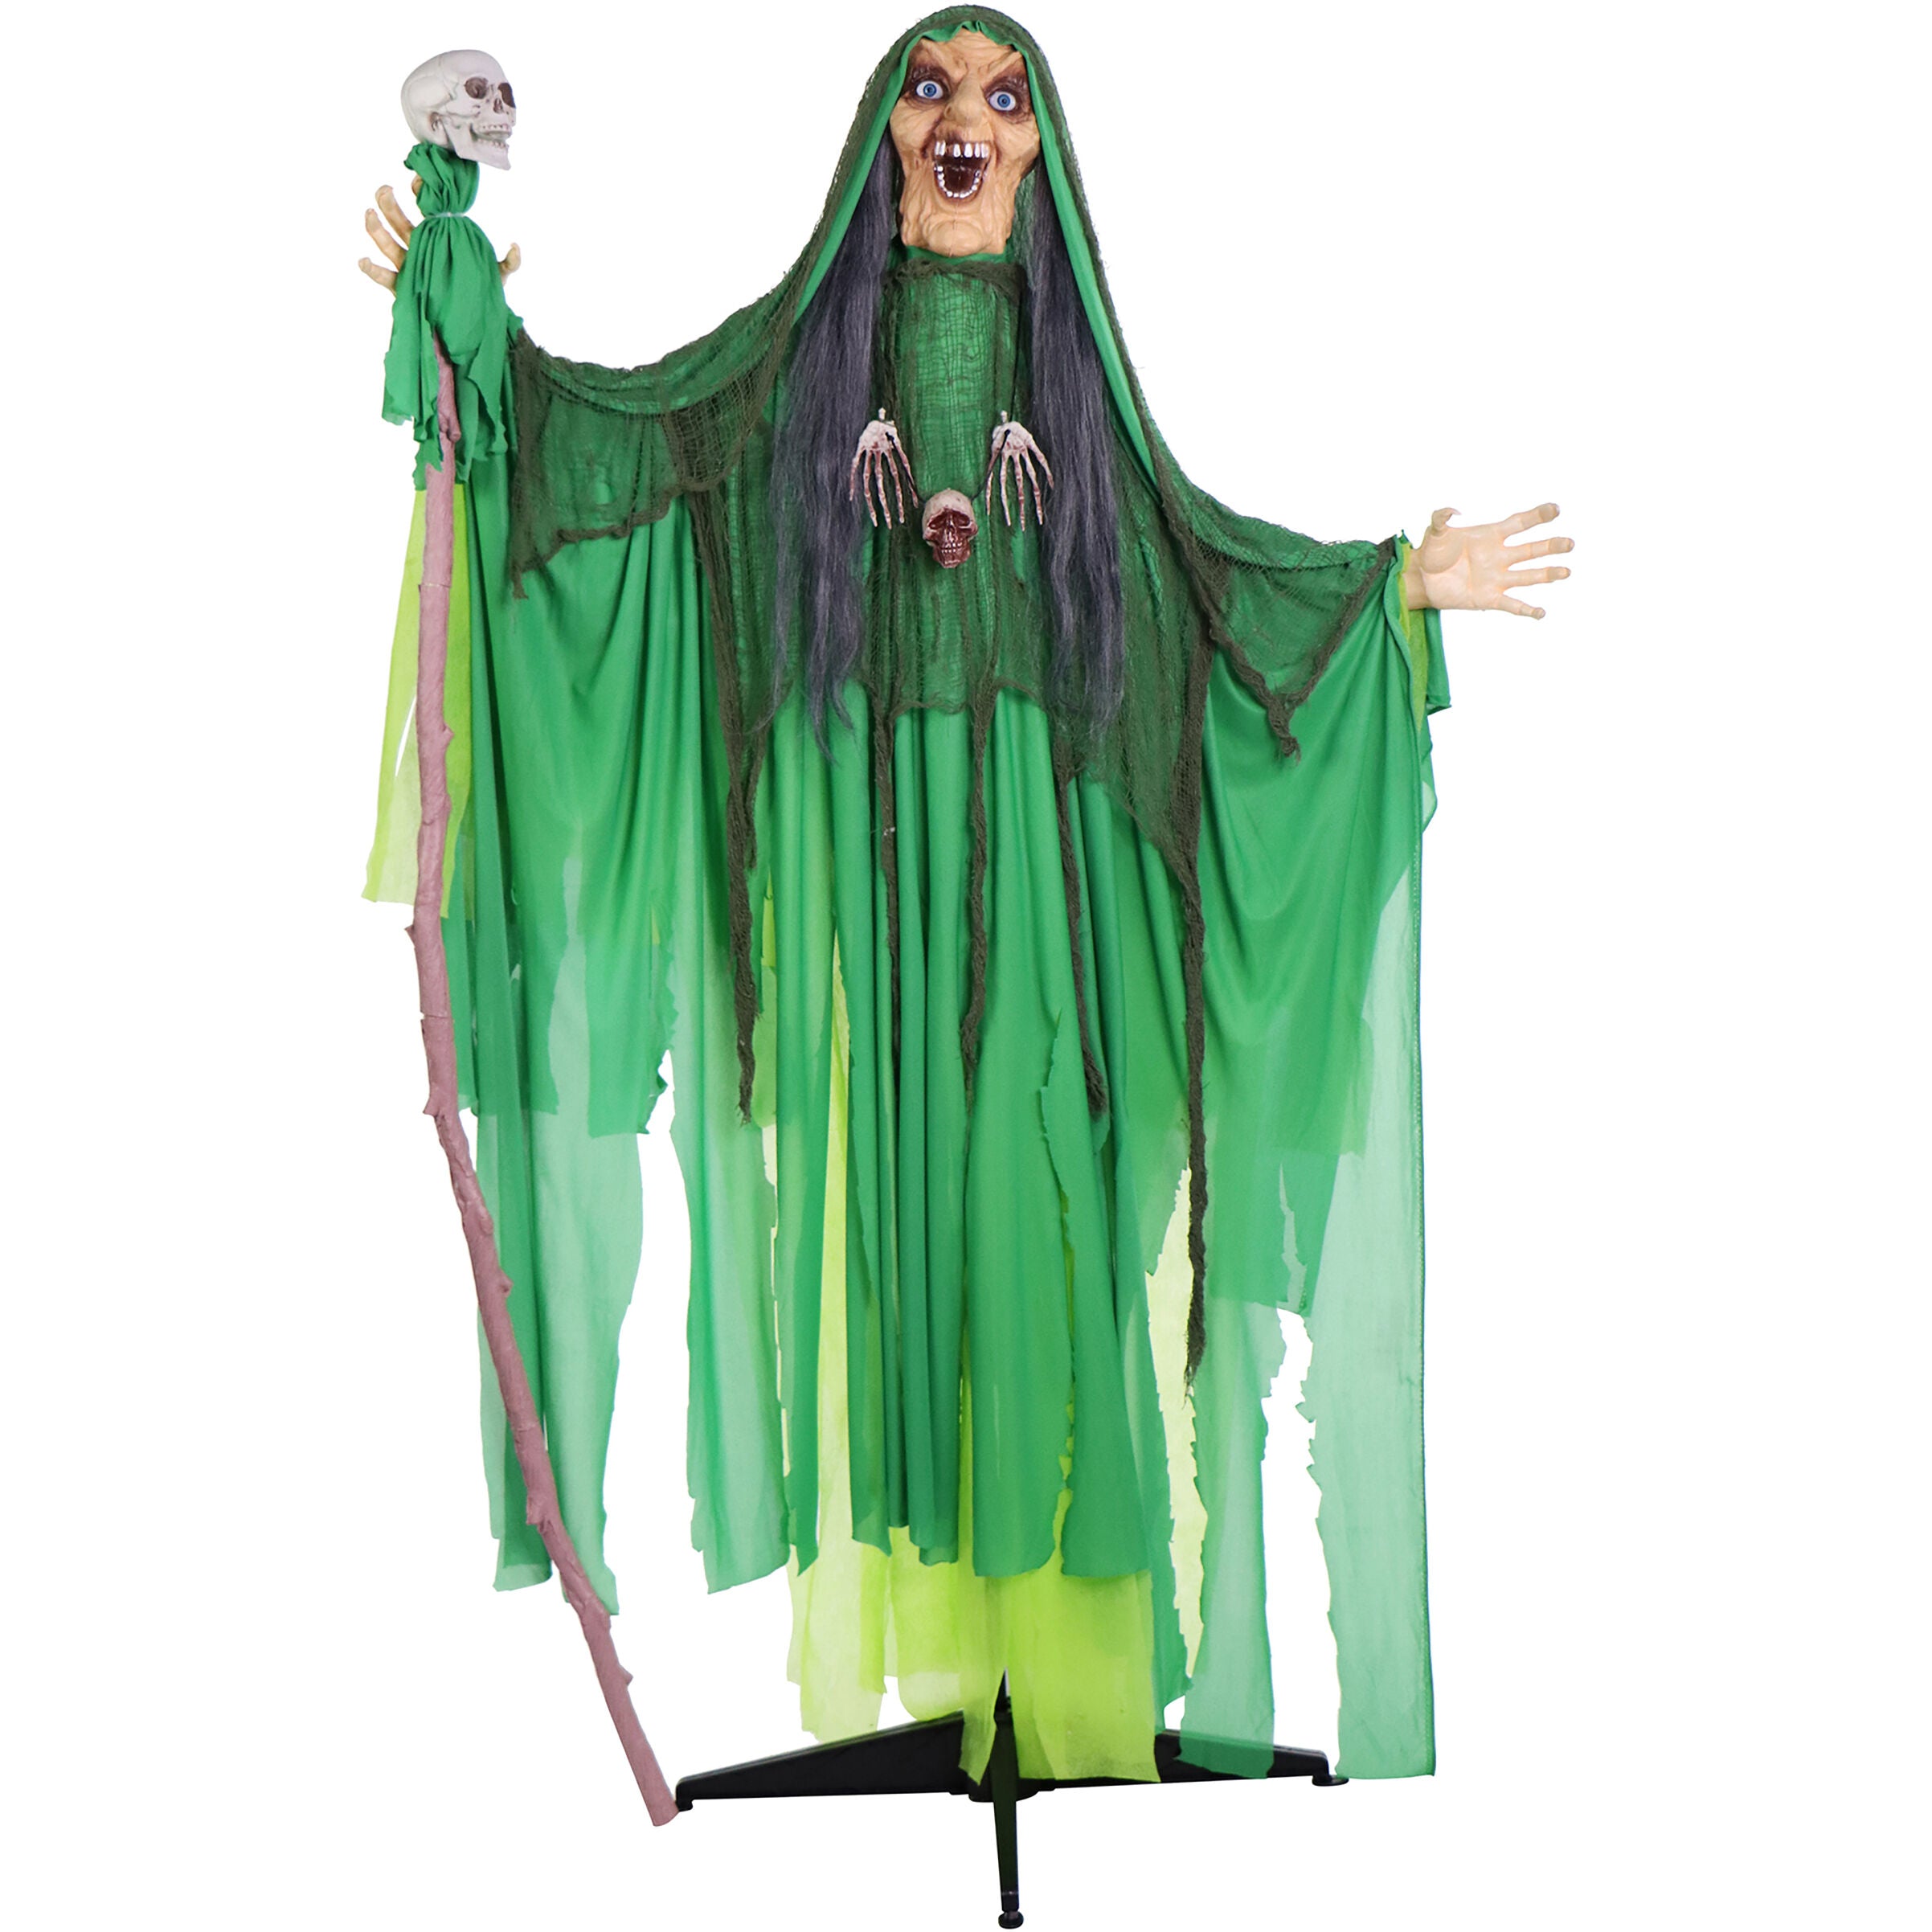 Haunted Hill Farm - Animatronic Shaking, Talking Voodoo Swamp Witch with Shrunken Skull Staff for Scary Halloween Decoration